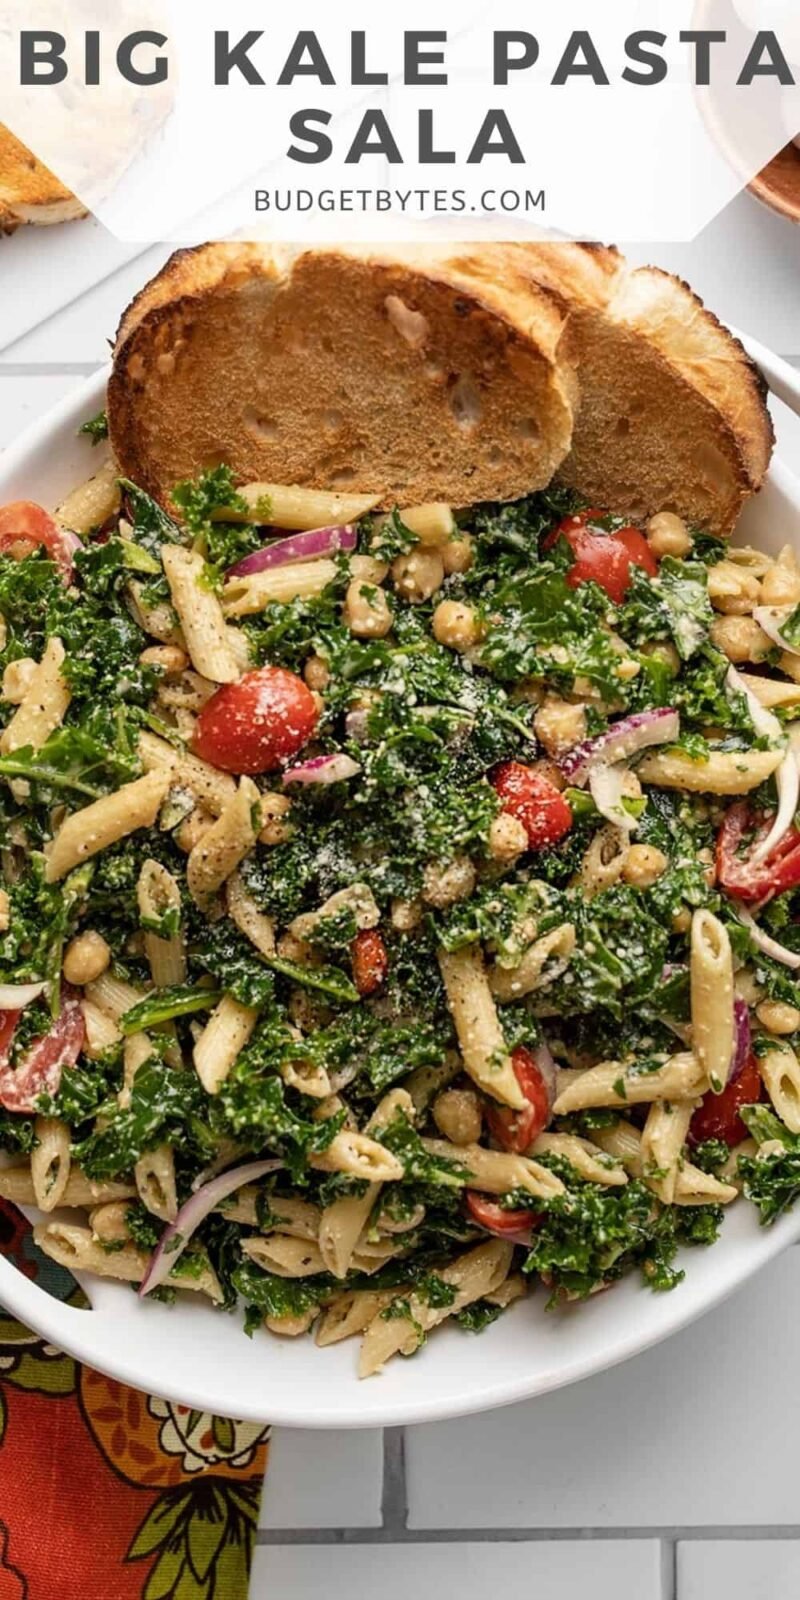 Overhead view of a serving bowl full of kale pasta salad